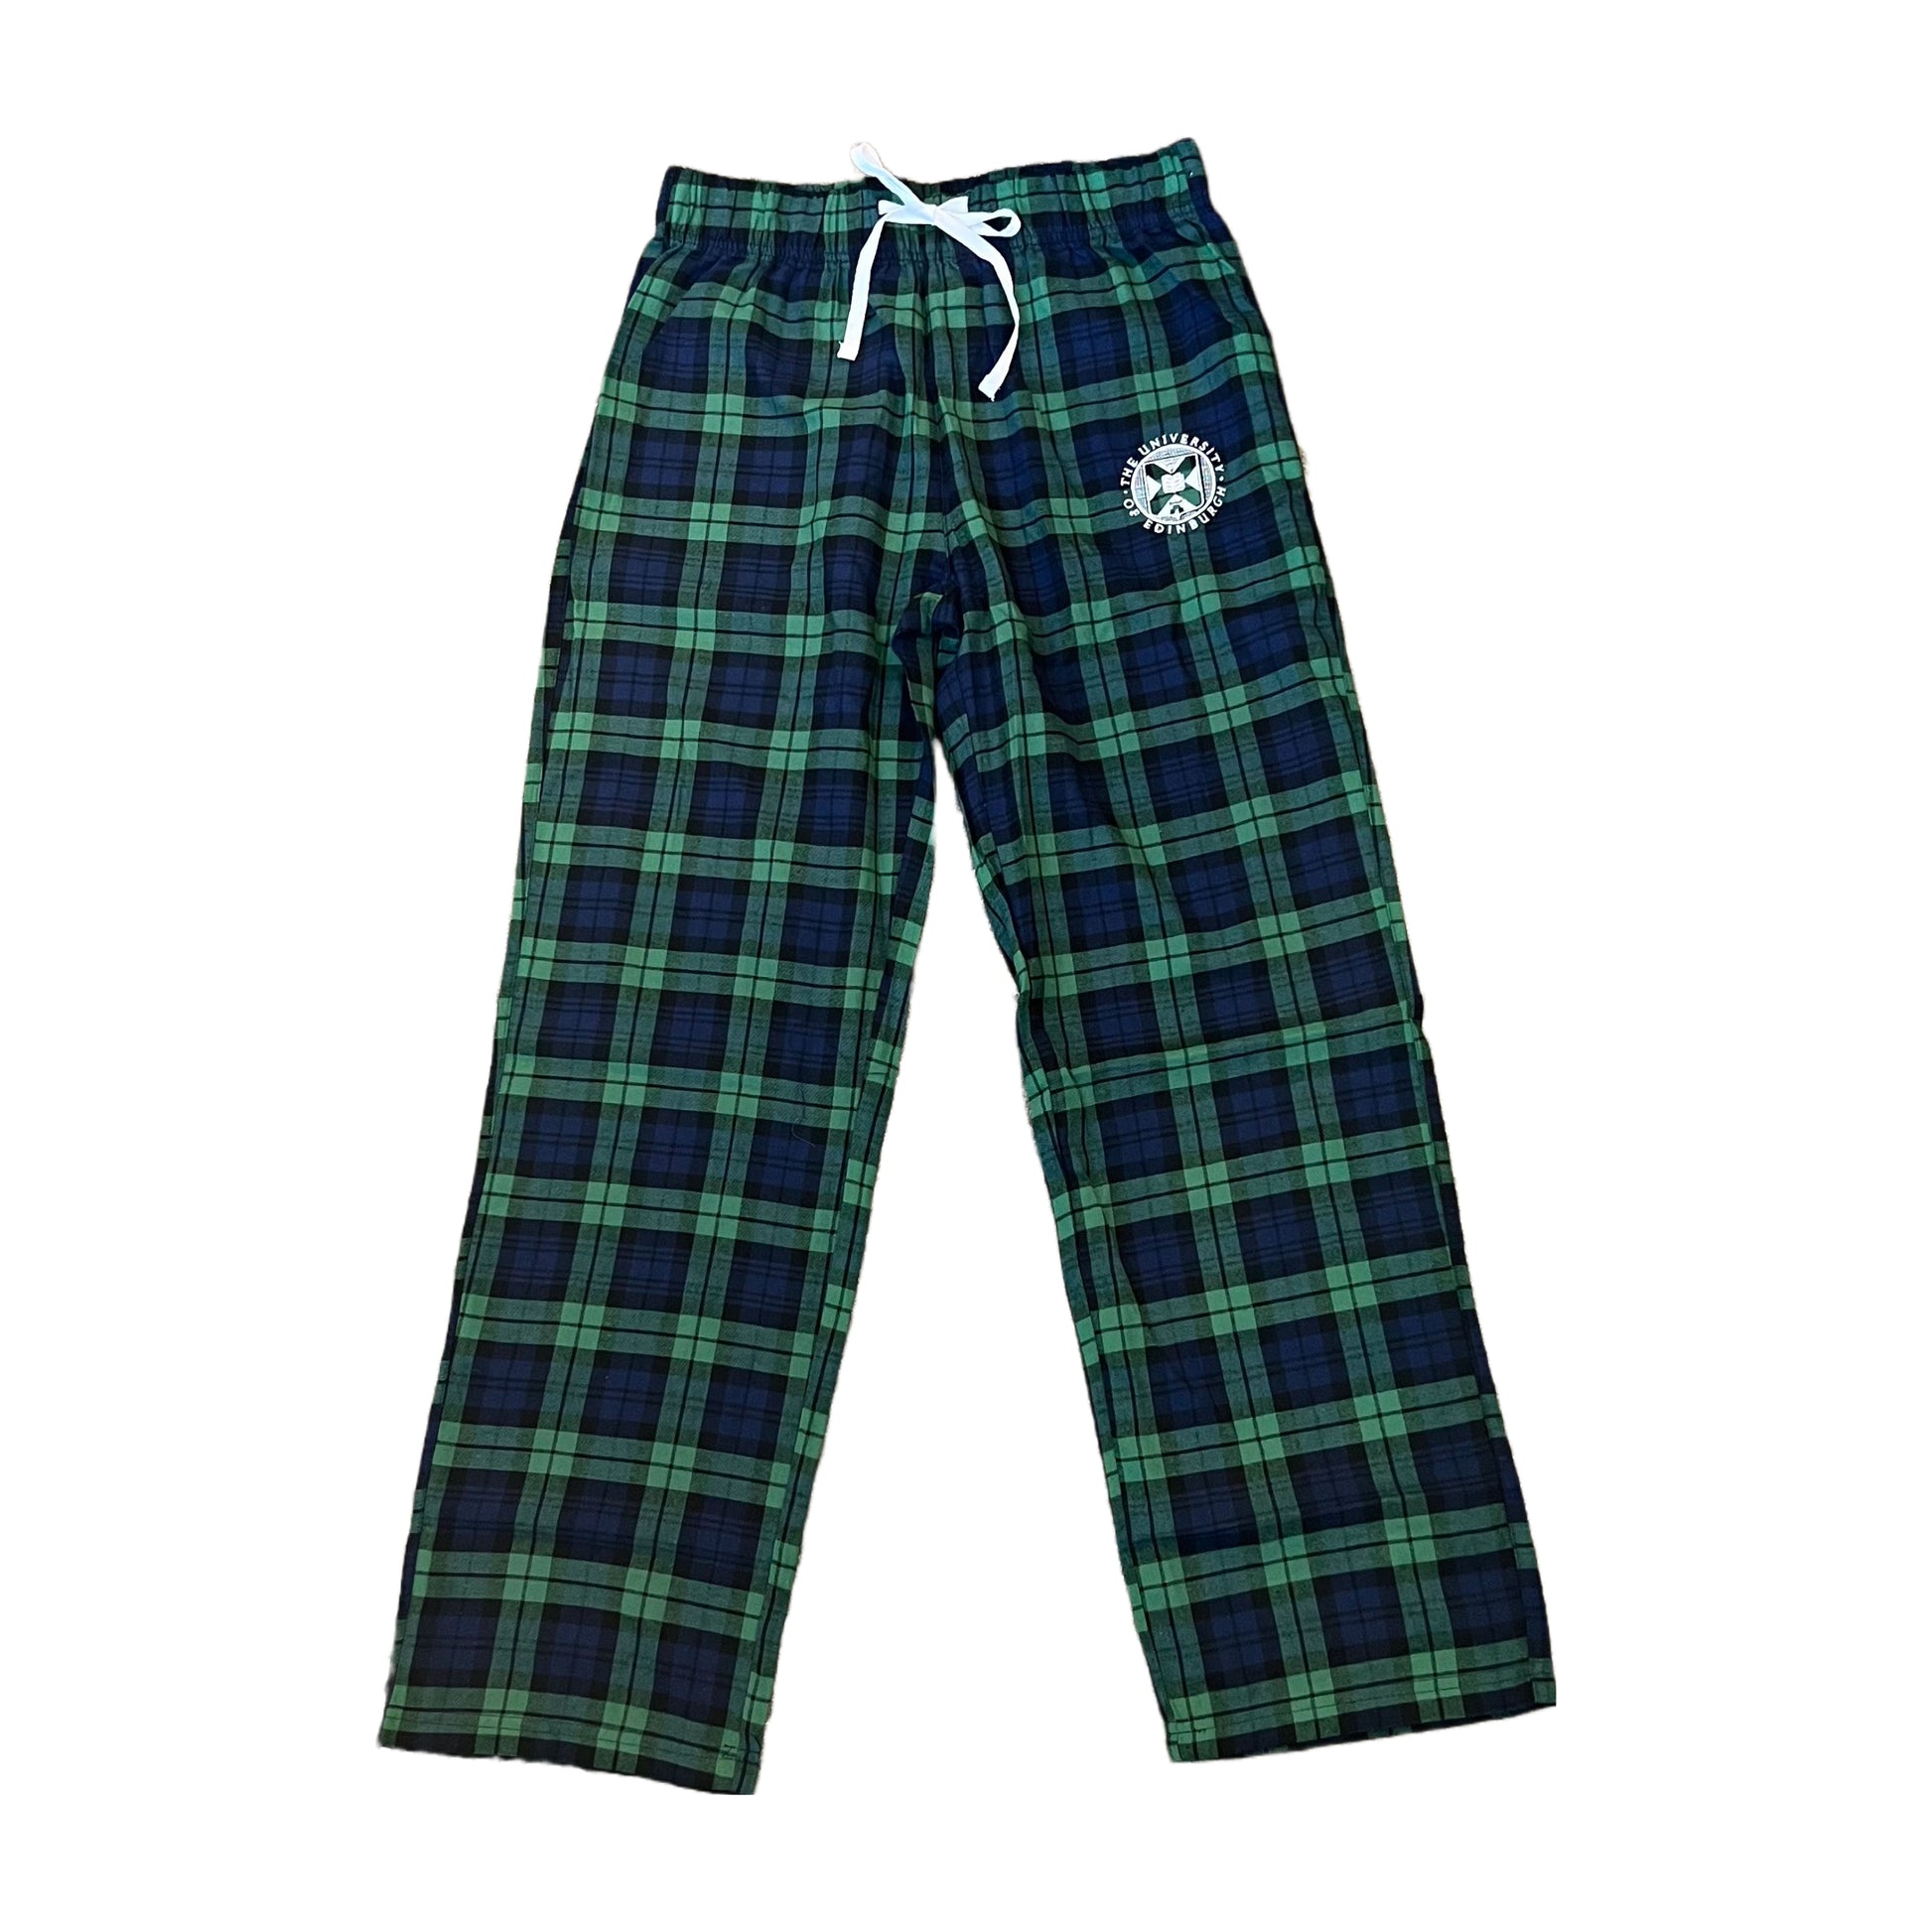 navy and green tartan trousers with university crest embroidered in white